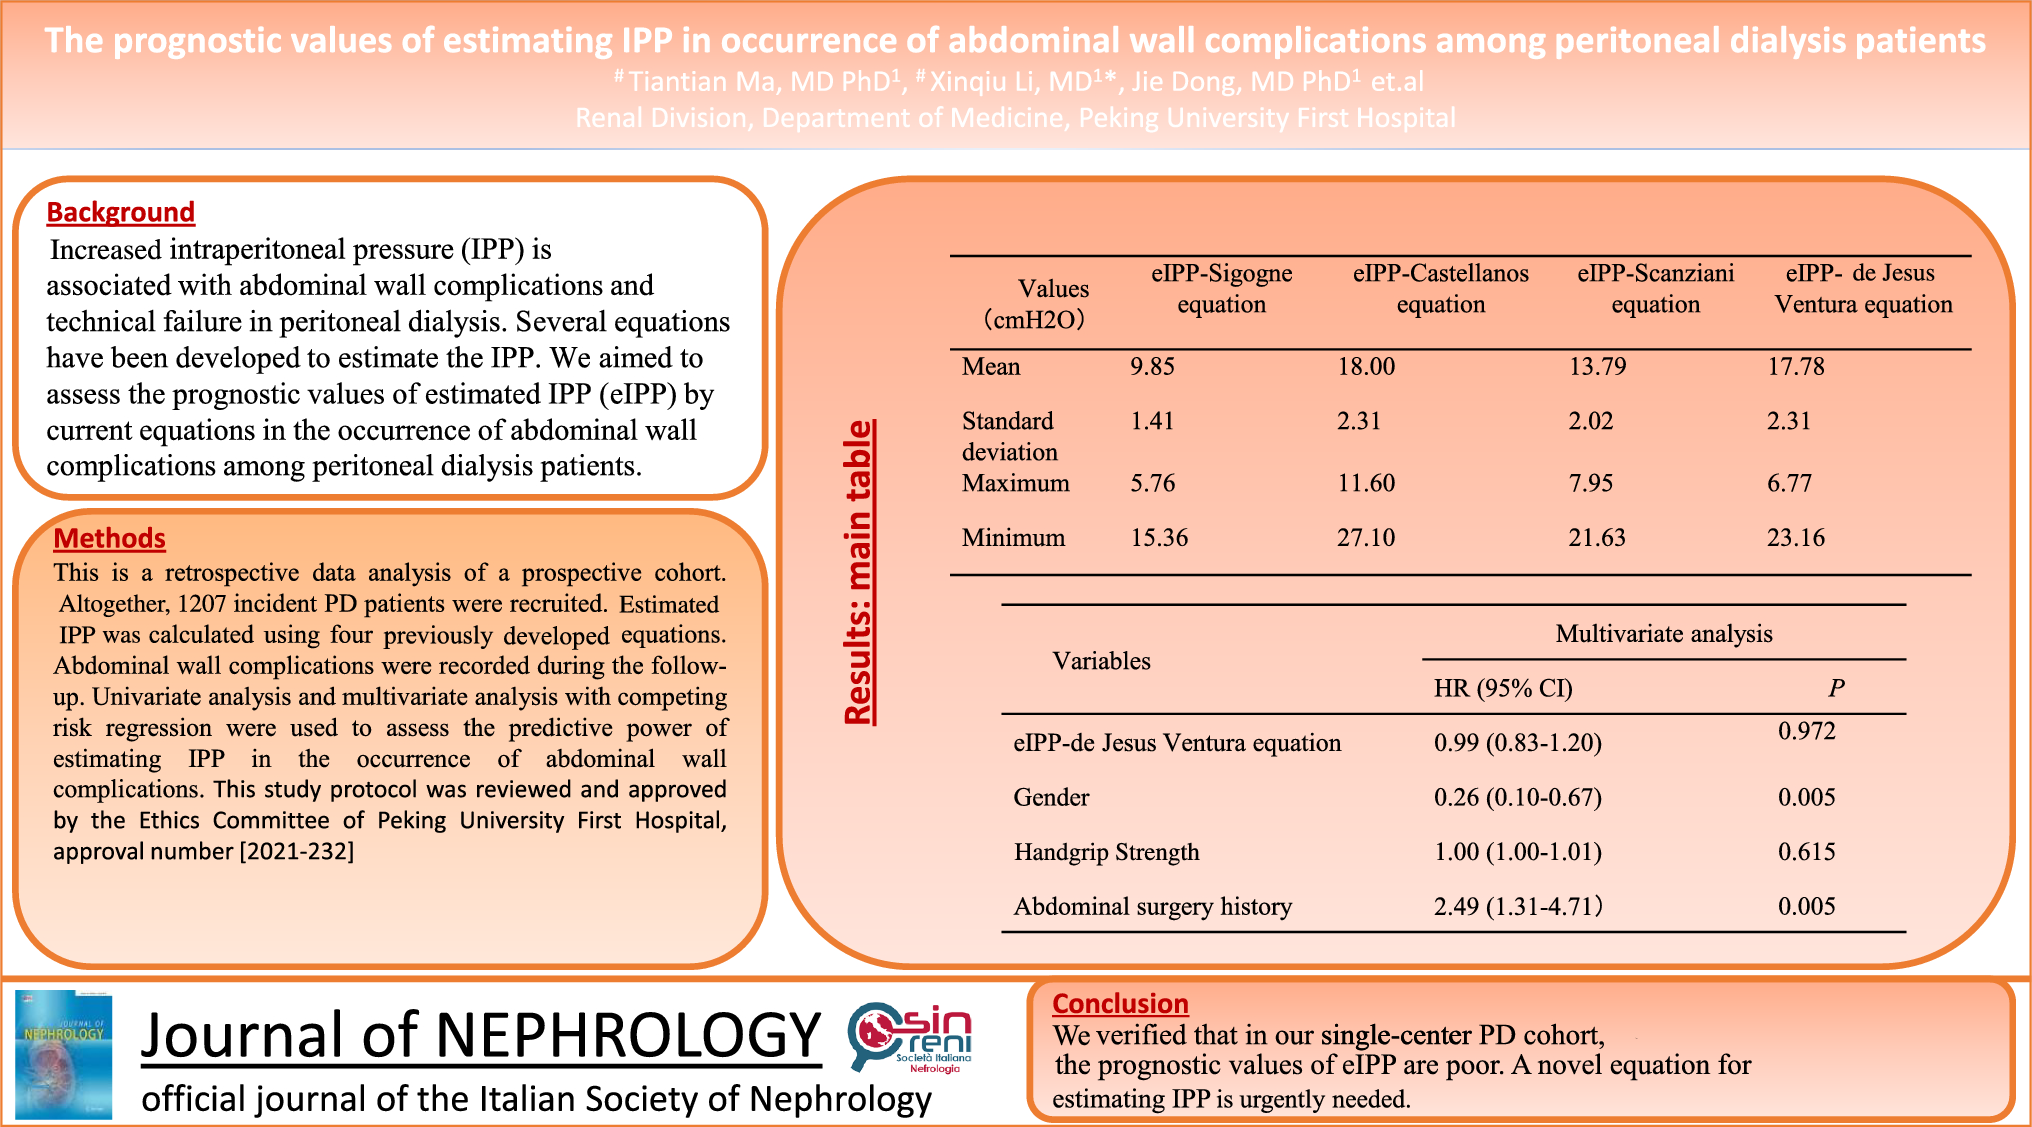 The prognostic values of estimating intraperitoneal pressure in the occurrence of abdominal wall complications in peritoneal dialysis patients